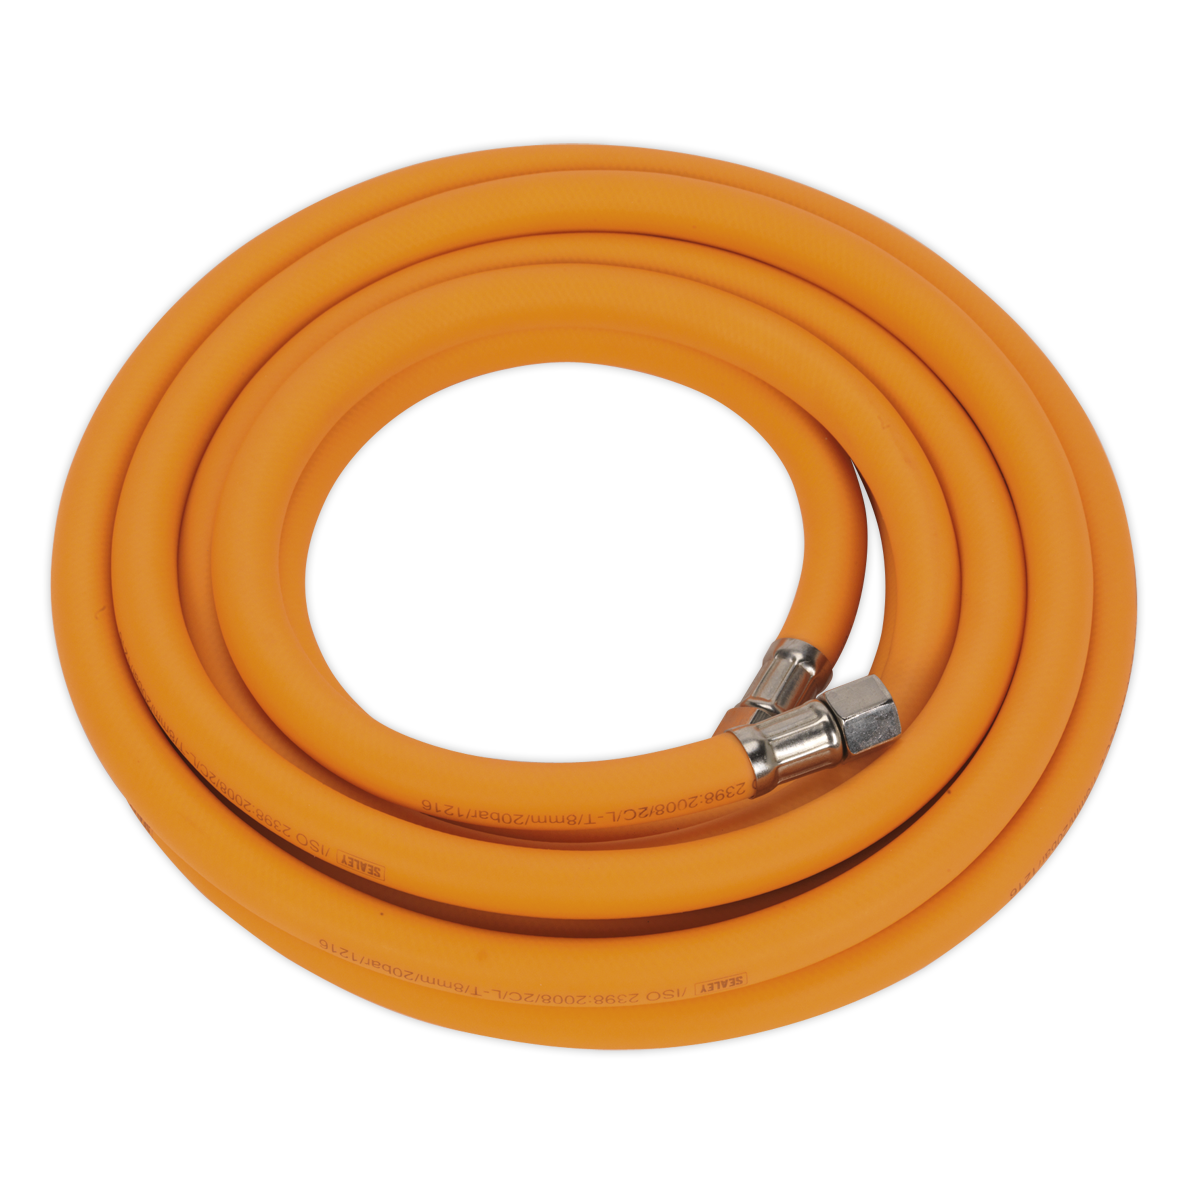 Sealey Air Hose 5m x ¯8mm Hybrid High-Visibility with 1/4"BSP Unions AHHC5